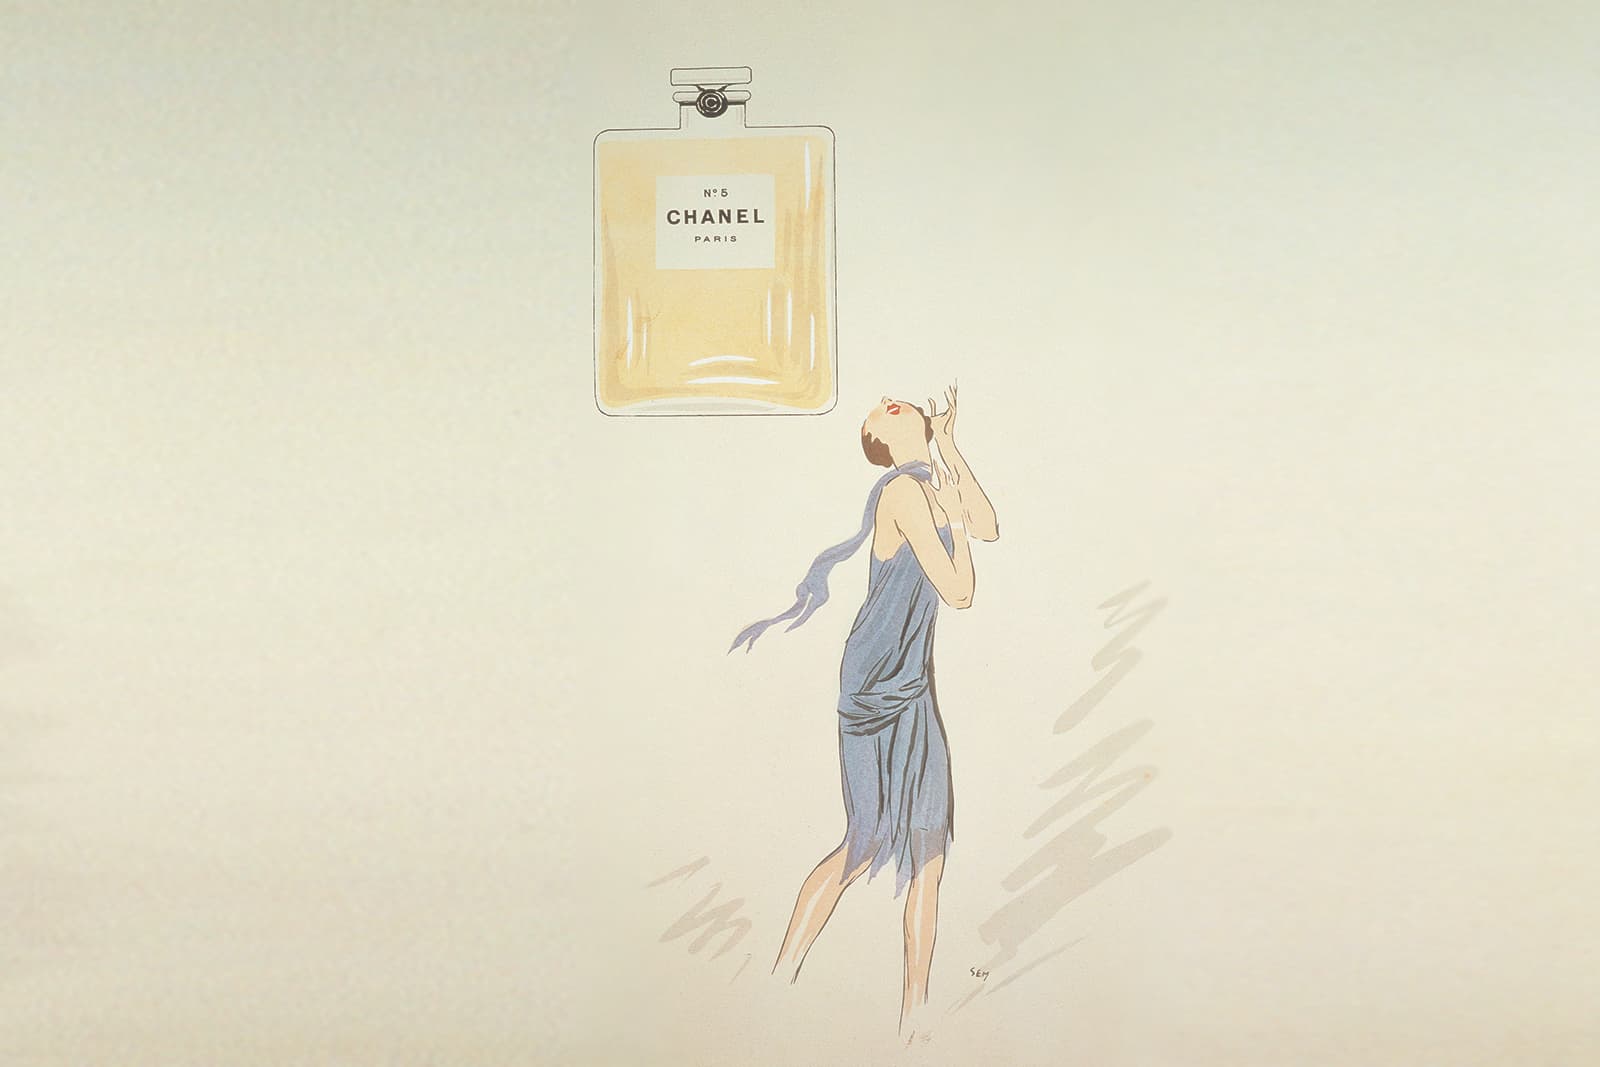 Chanel N°5 perfume was first launched in 1921 and has become an icon for the brand